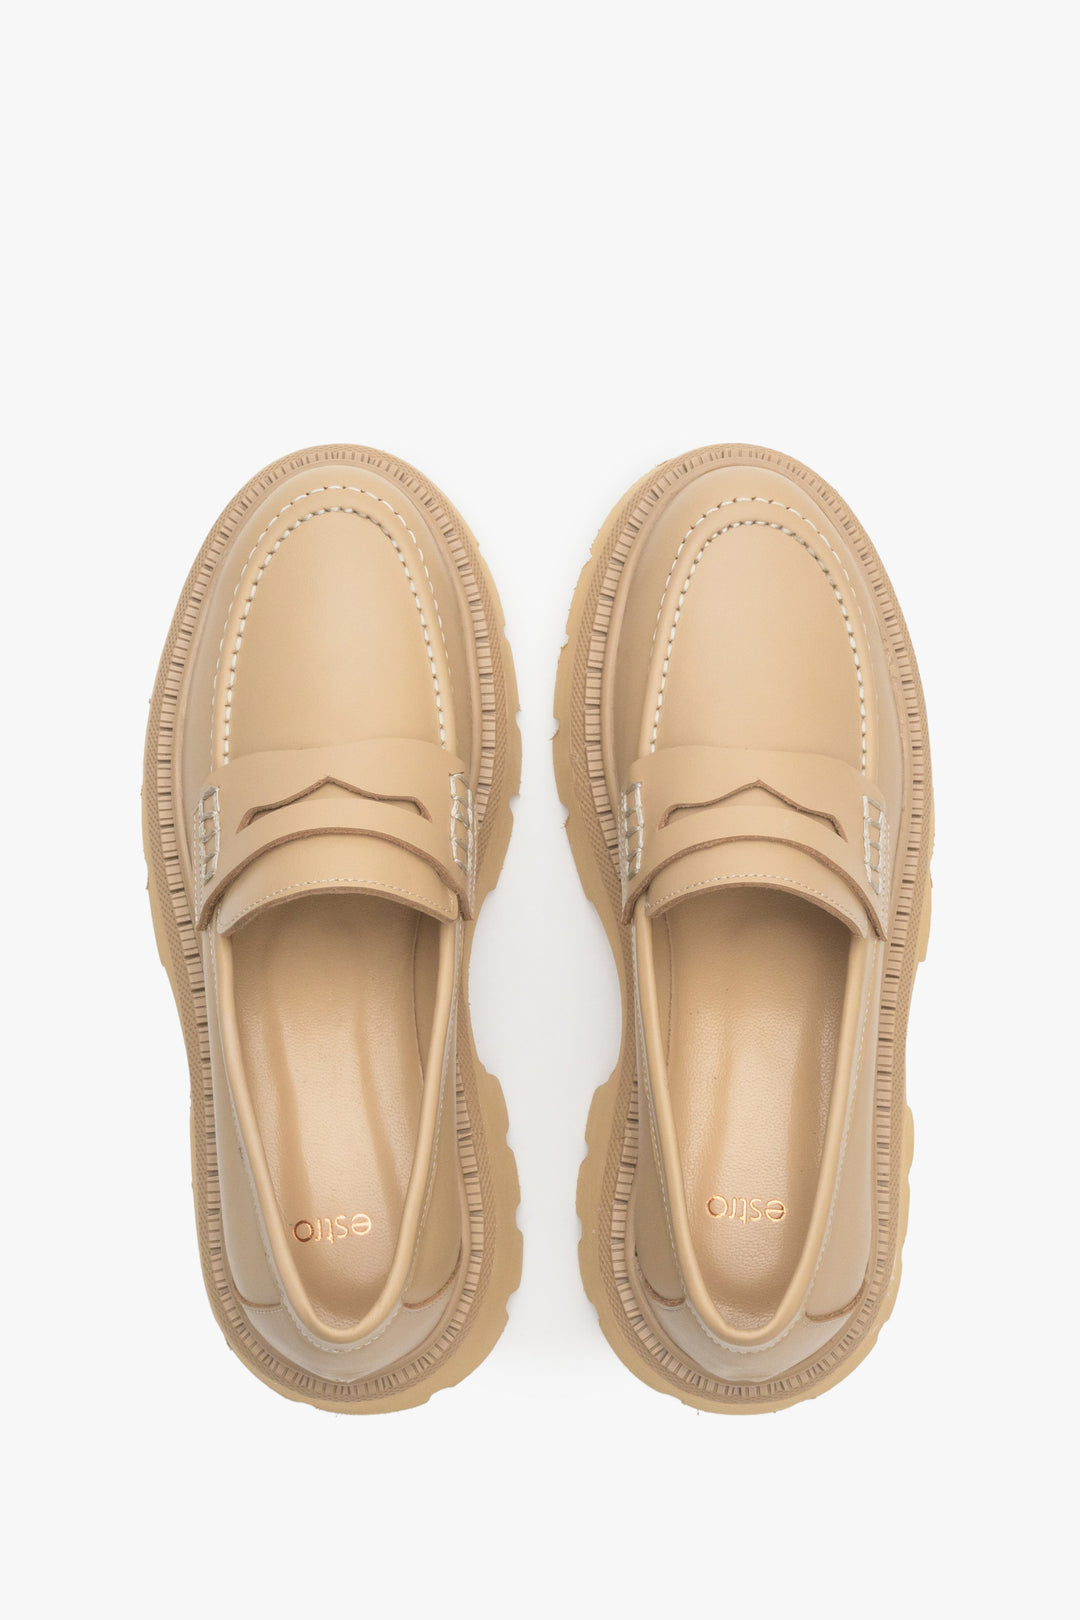 Women's leather beige loafers by Estro - top view presentation of the model.